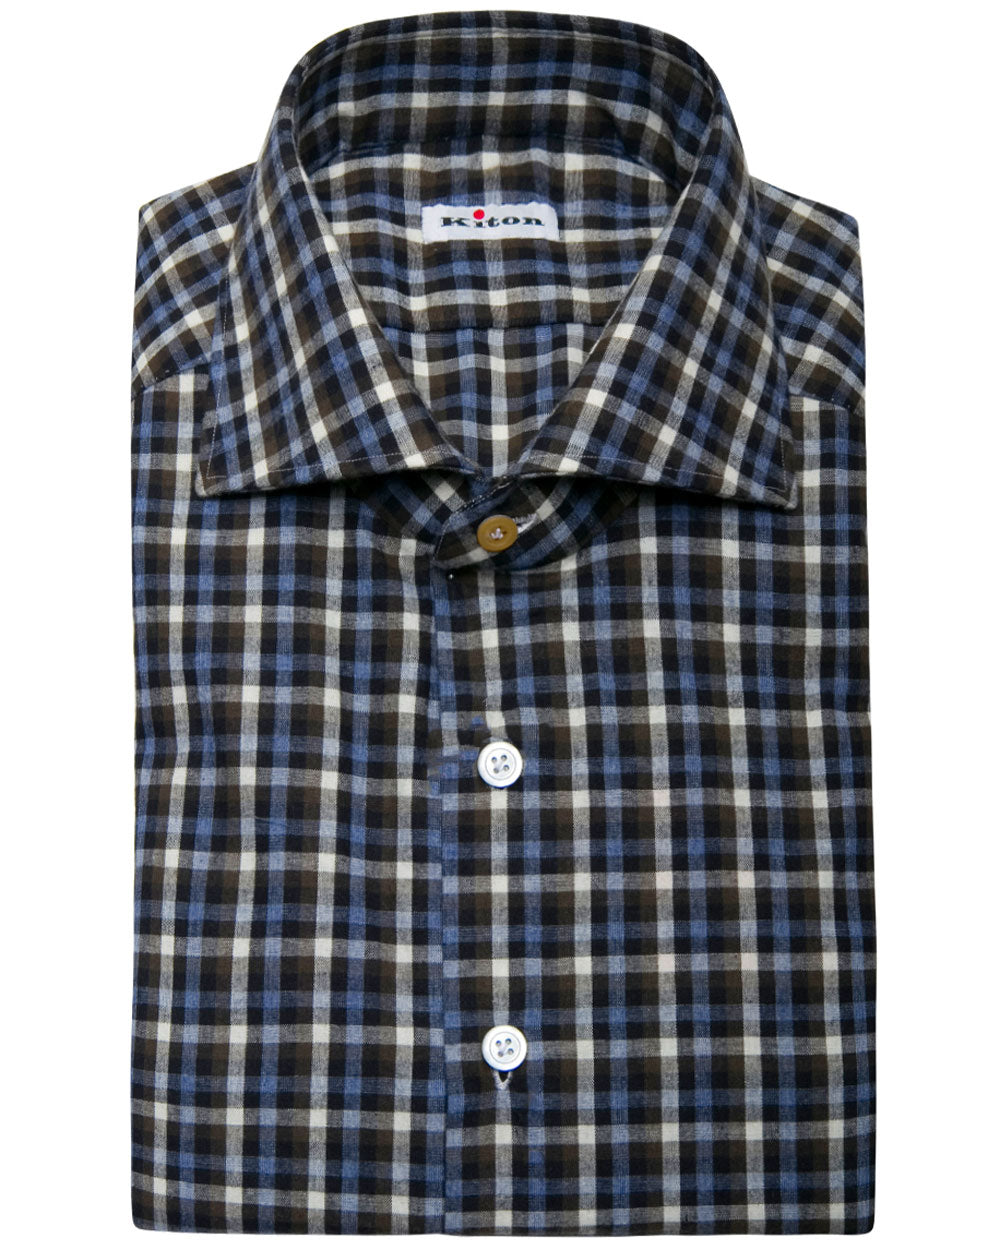 Blue and Brown Plaid Brushed Cotton Sportshirt